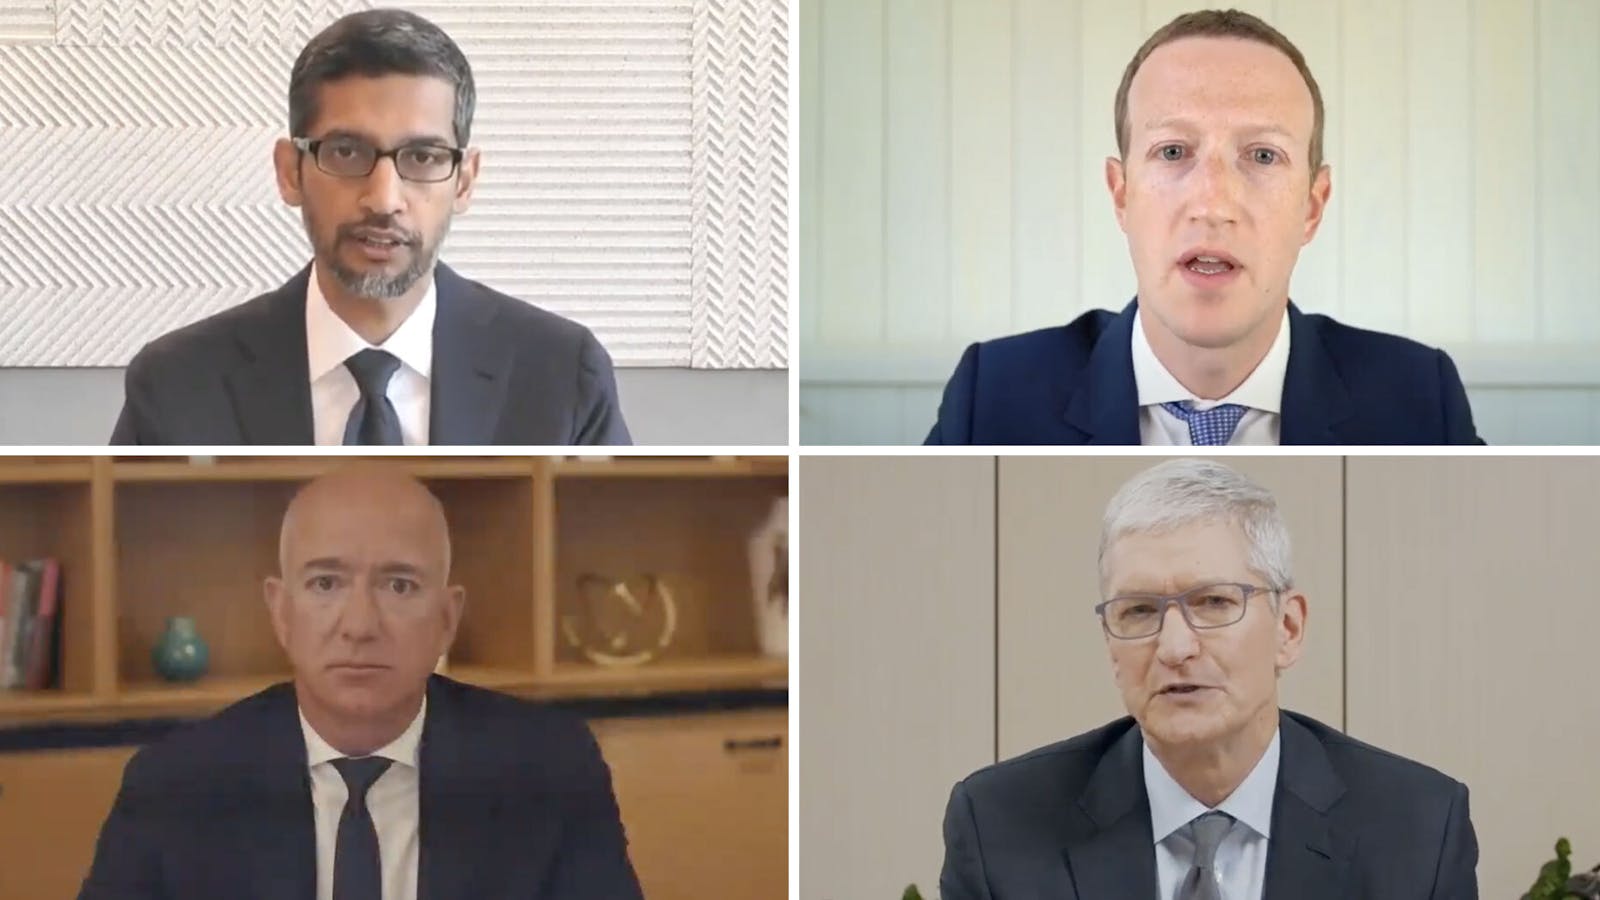 Clockwise from top left: Alphabet CEO Sundar Pichai; Facebook CEO Mark Zuckerberg; Apple CEO Tim Cook; and Amazon CEO Jeff Bezos appeared before the House antitrust subcommittee Wednesday. Image: House Committee on the Judiciary